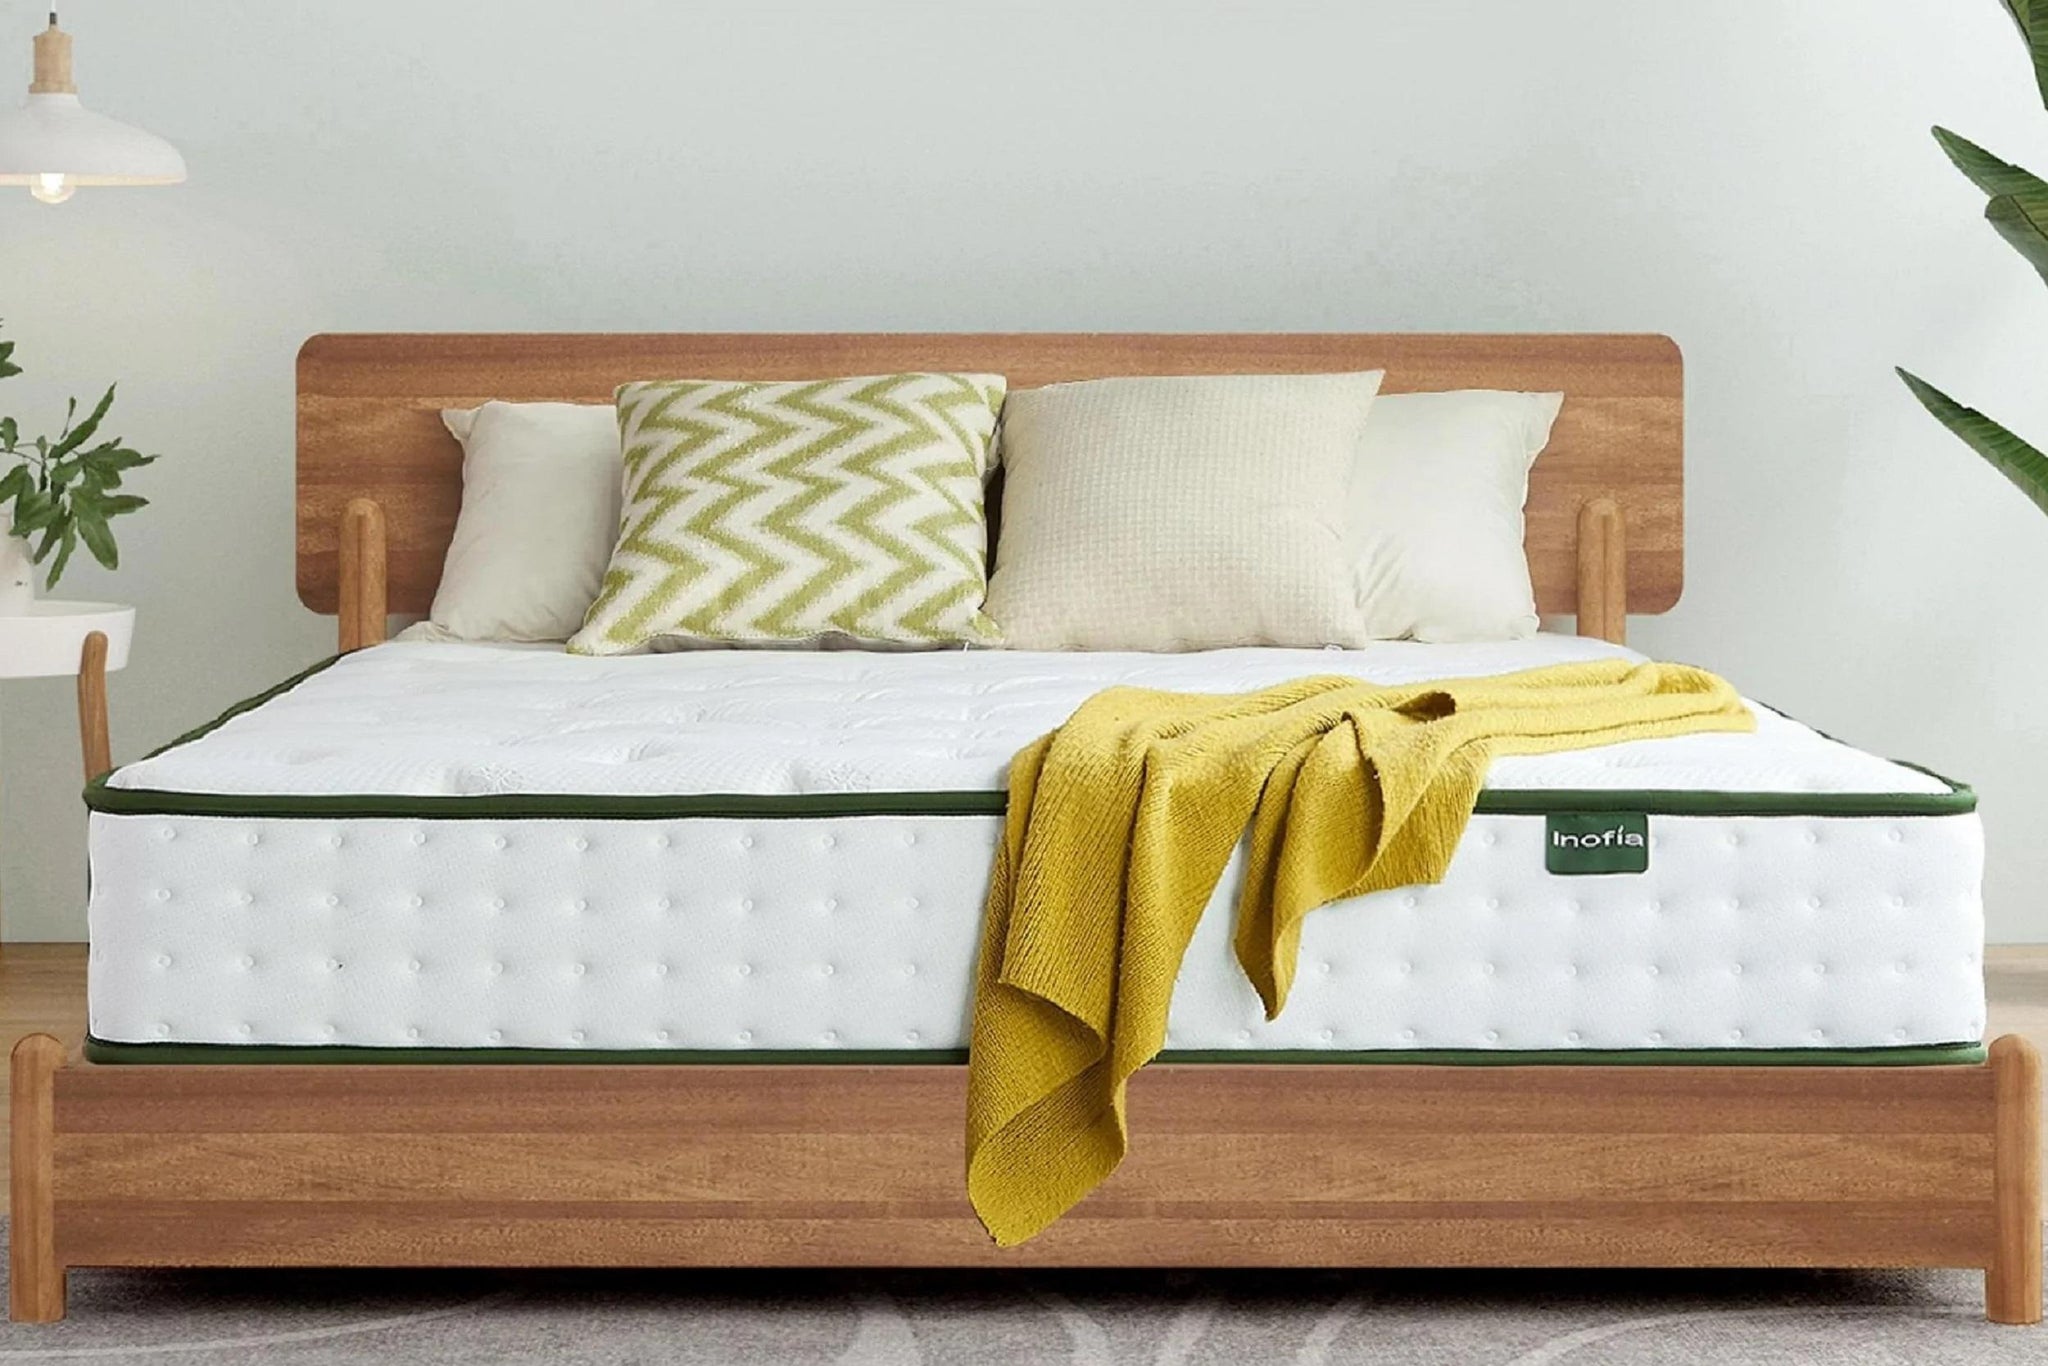 How do I Choose the Right King Size Memory foam Mattress?